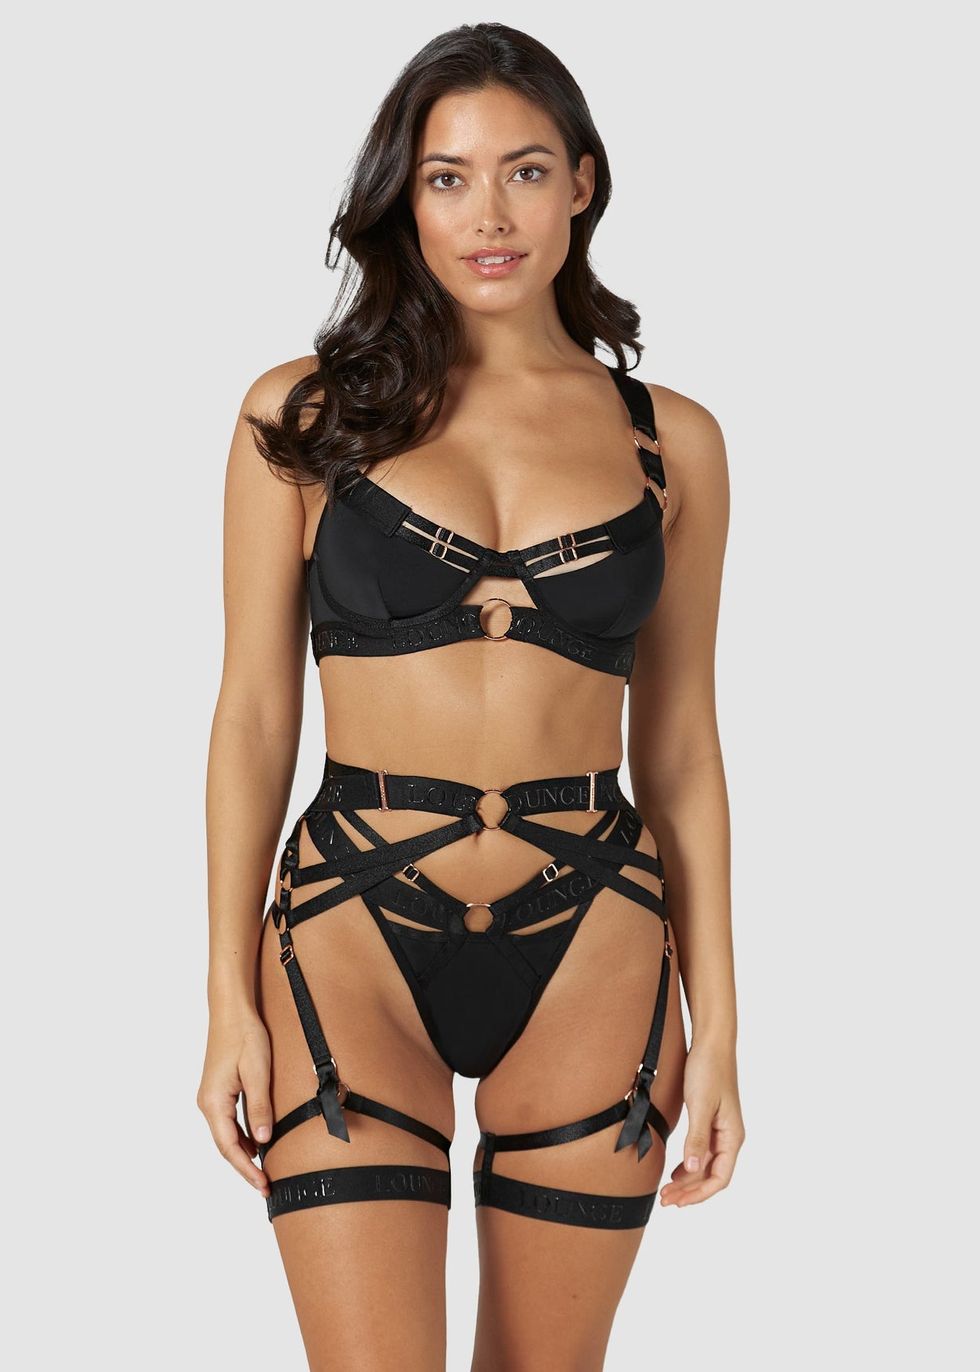 What to wear to a sex party - Soriya Intimates Set